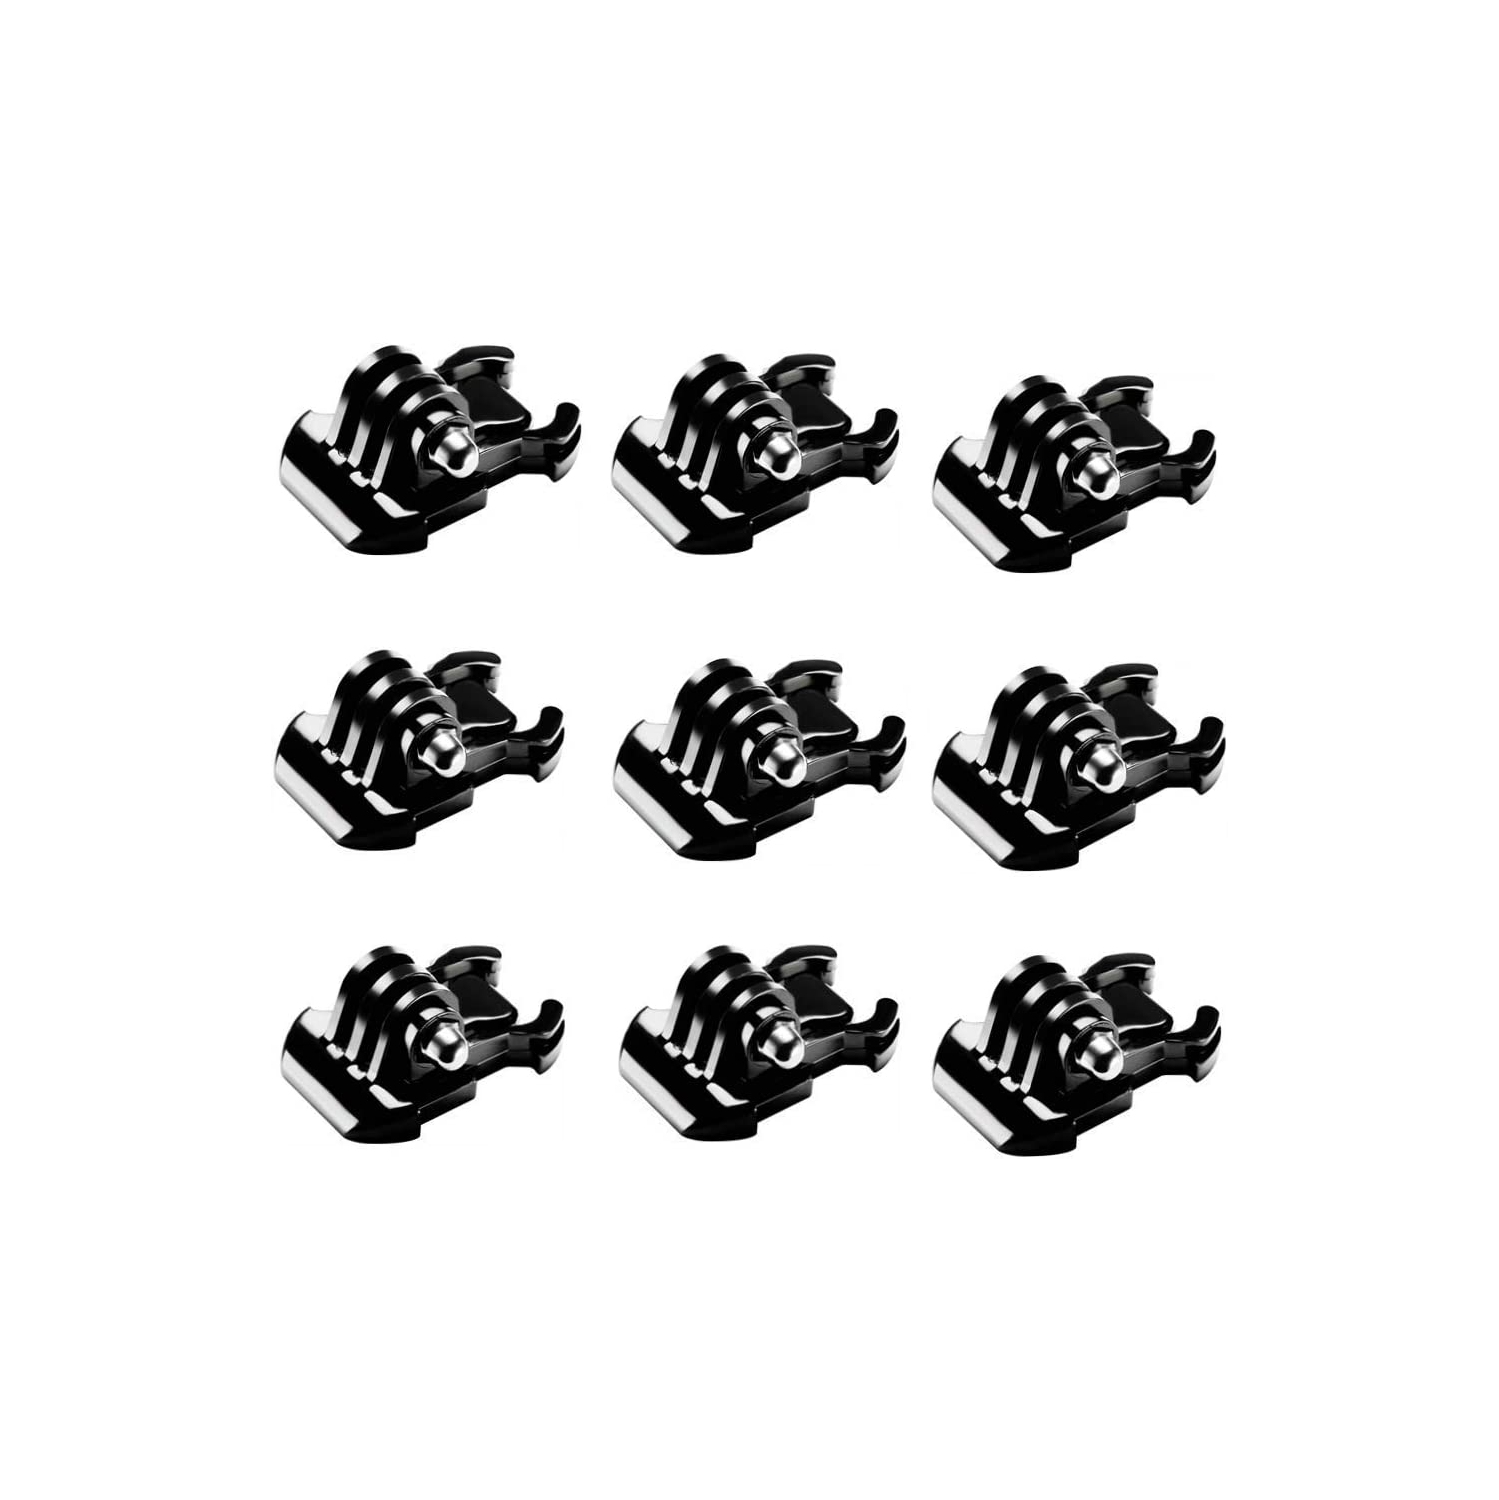 9 pcs Buckle Clip Basic Mount Compatible with GoPro Hero 8 Max 7 (2018) 6 5 4 3+ 3 2 Black Silver Session Fusion, DJI Osmo Action, Xiaomi YI 4K, DBPOWER, AKASO, Campark, SJCAM Spor